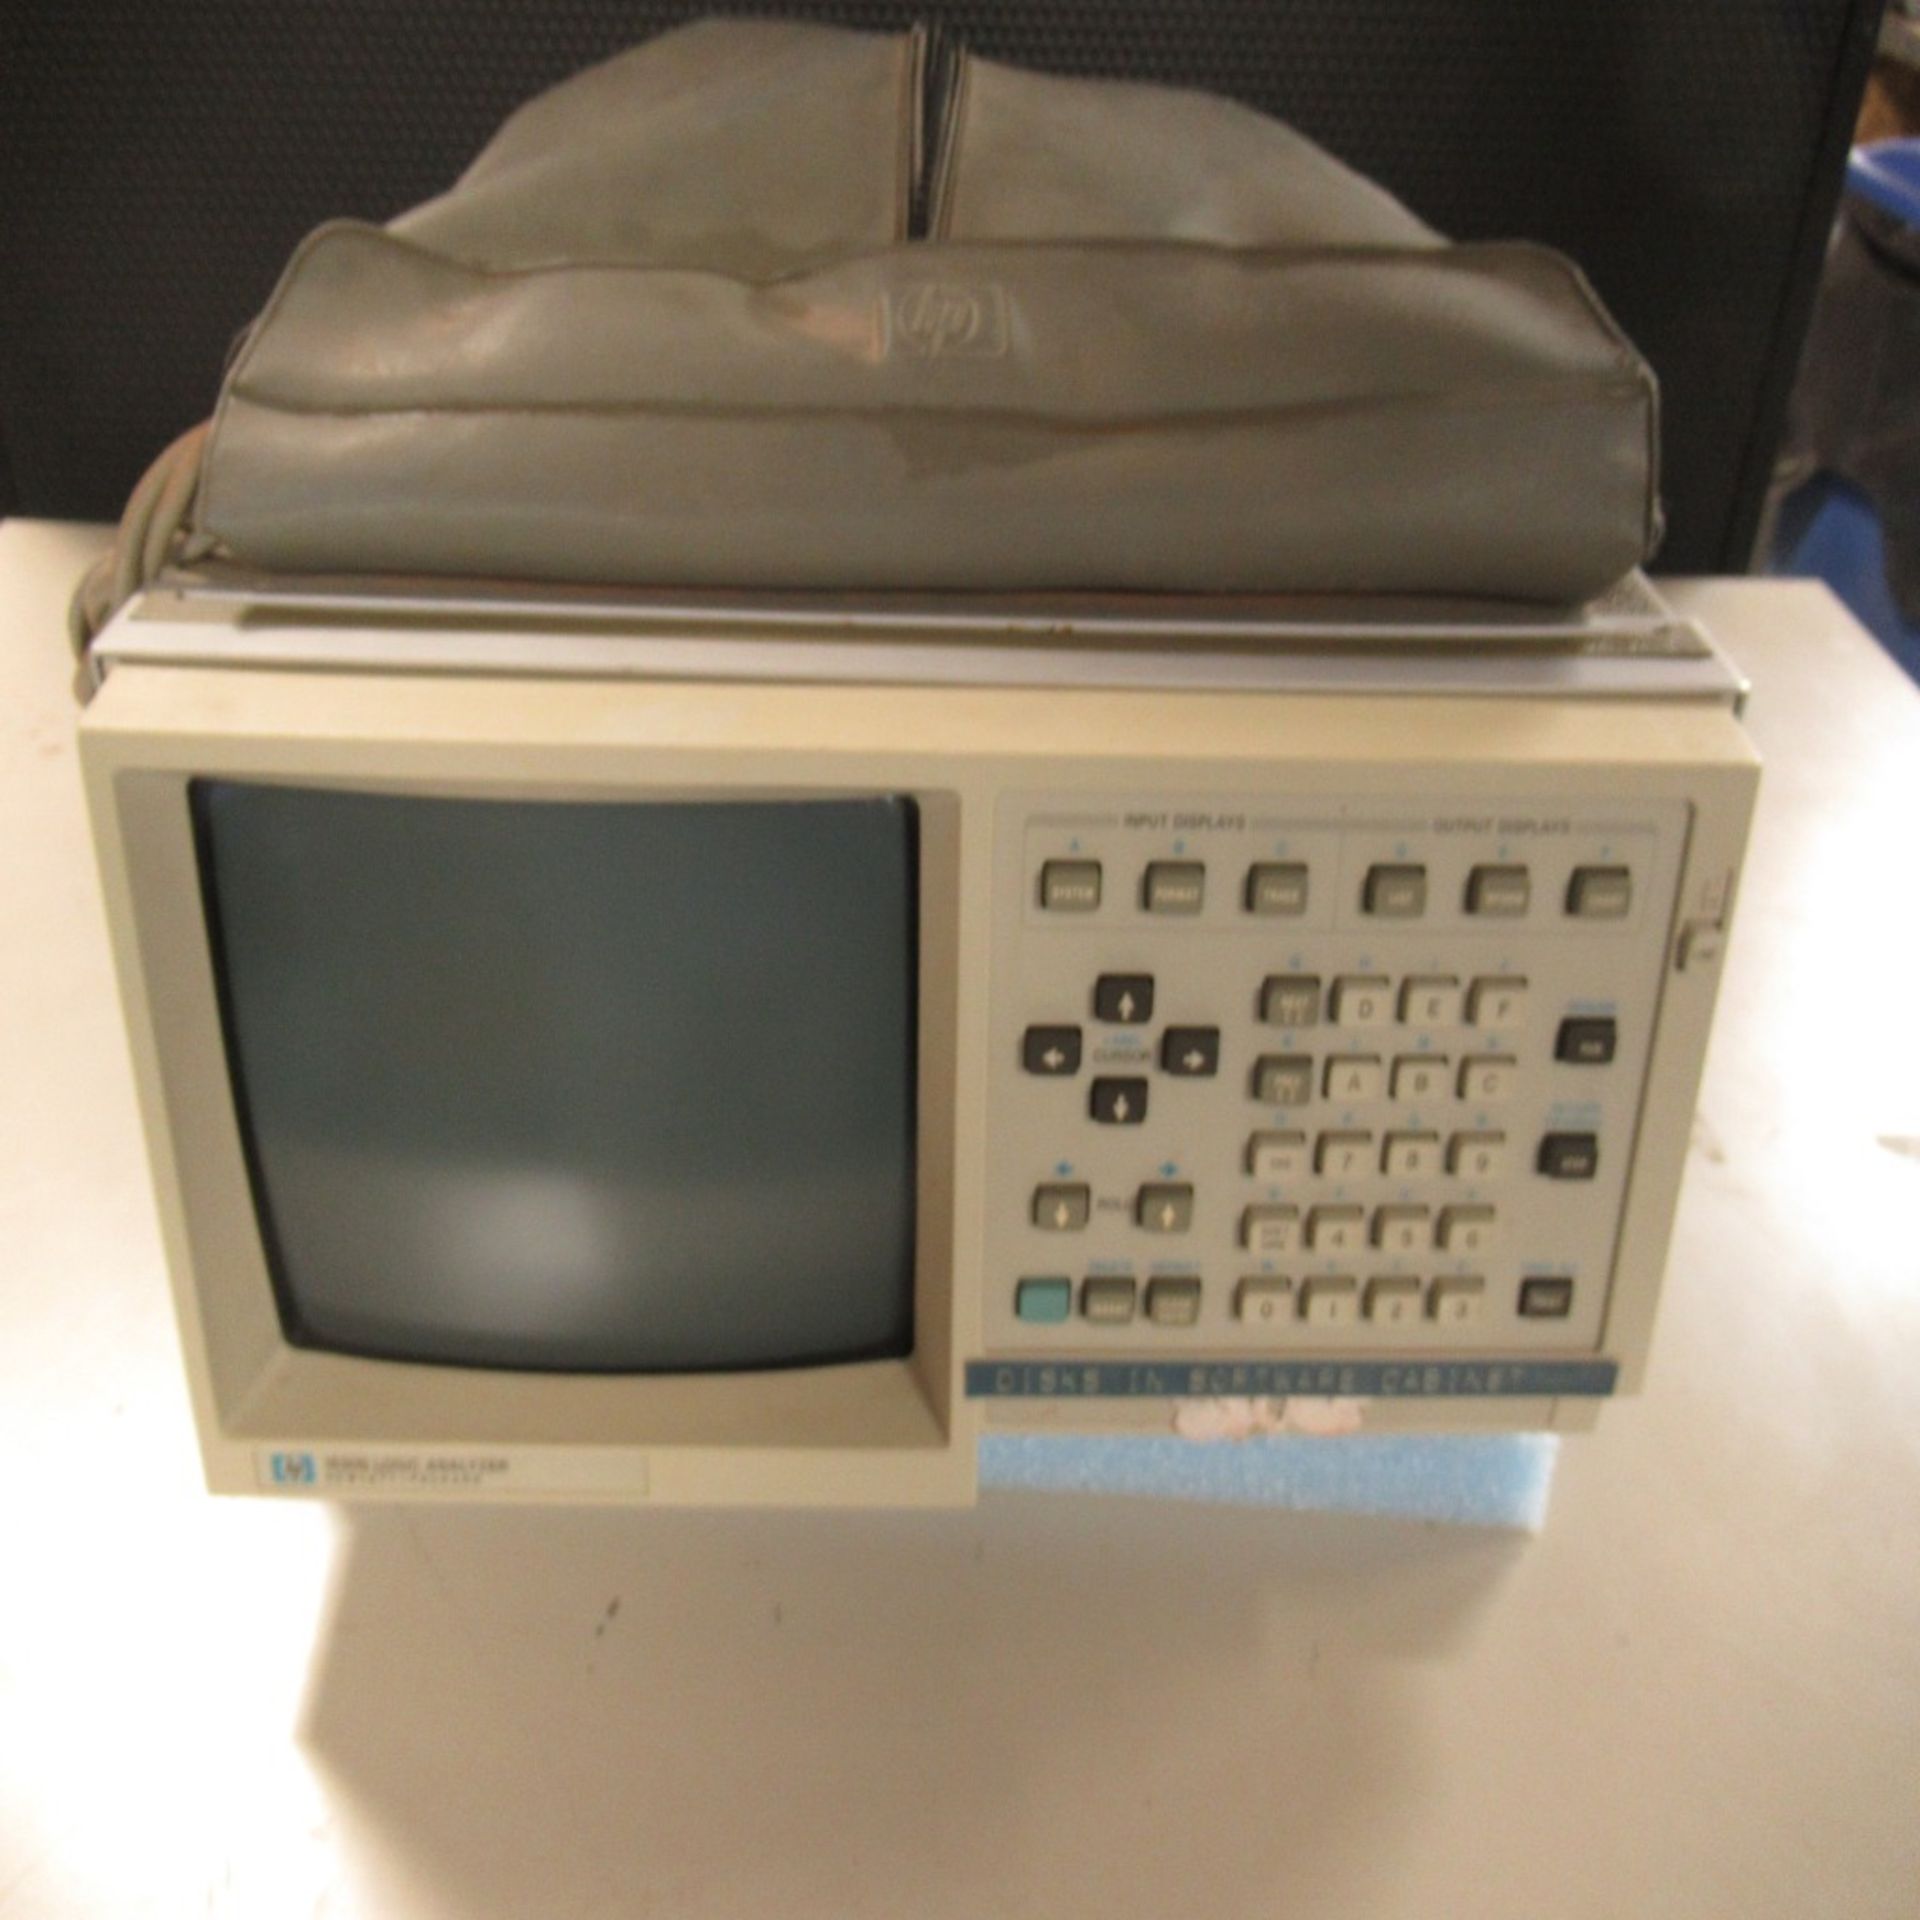 PHOTON SNAP SHOT MODEL 6000 *POWERS ON* NO SCREEN DISPLAY; FARNELL AP20-80 REGULATED POWER SUPPLY * - Image 68 of 222